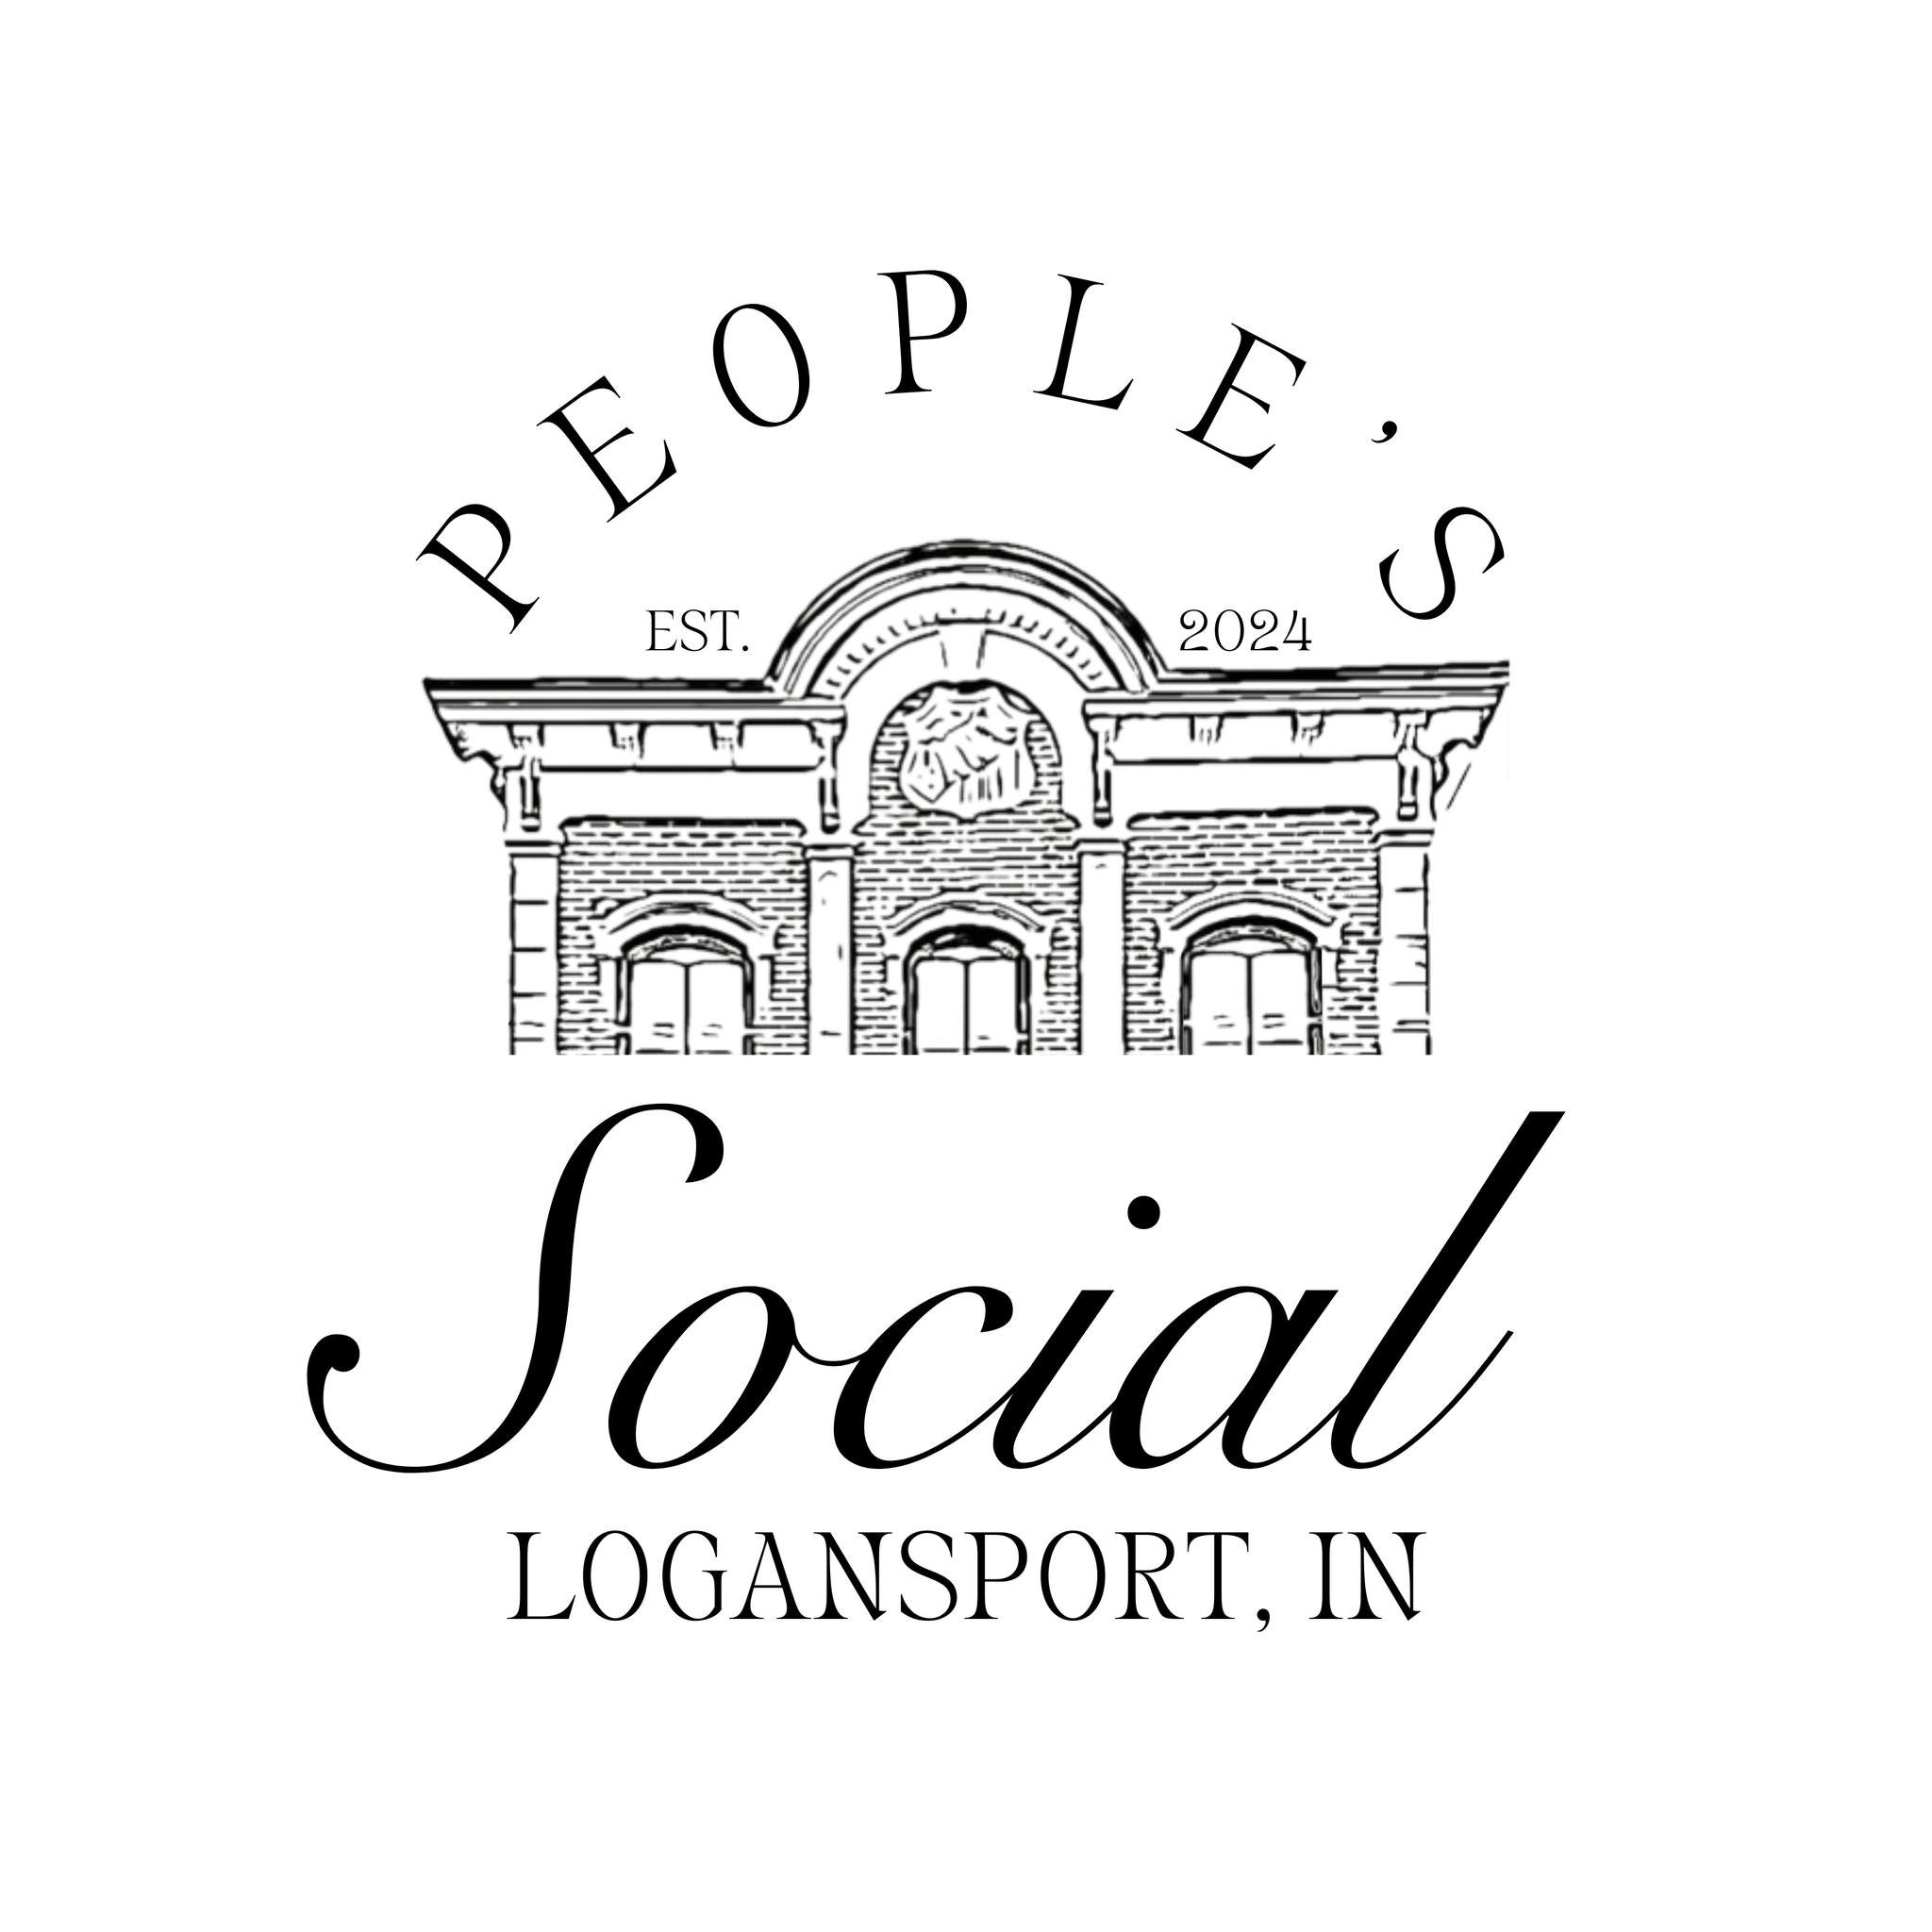 The People's Social